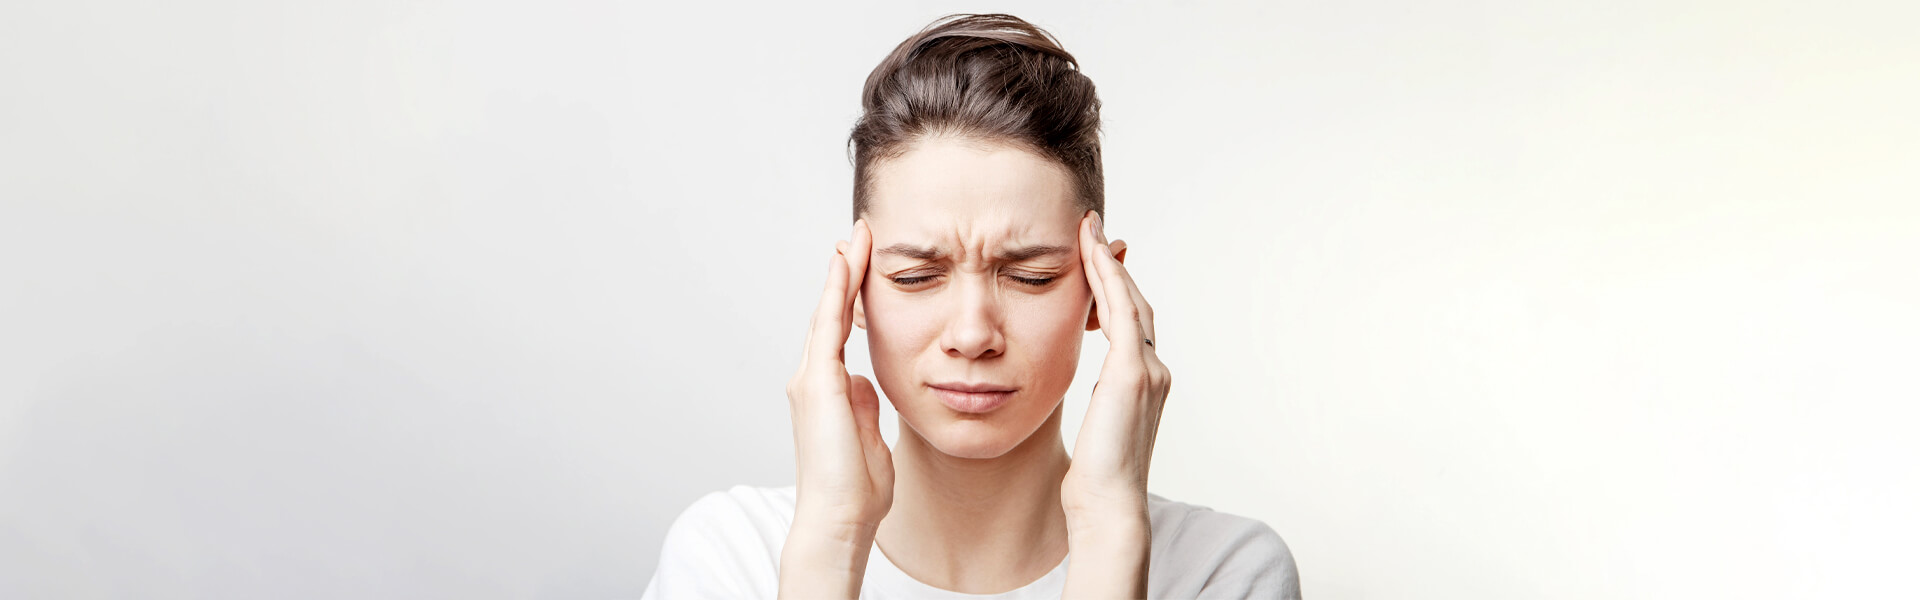 Botox Injections as a Solution for Migraine Headaches